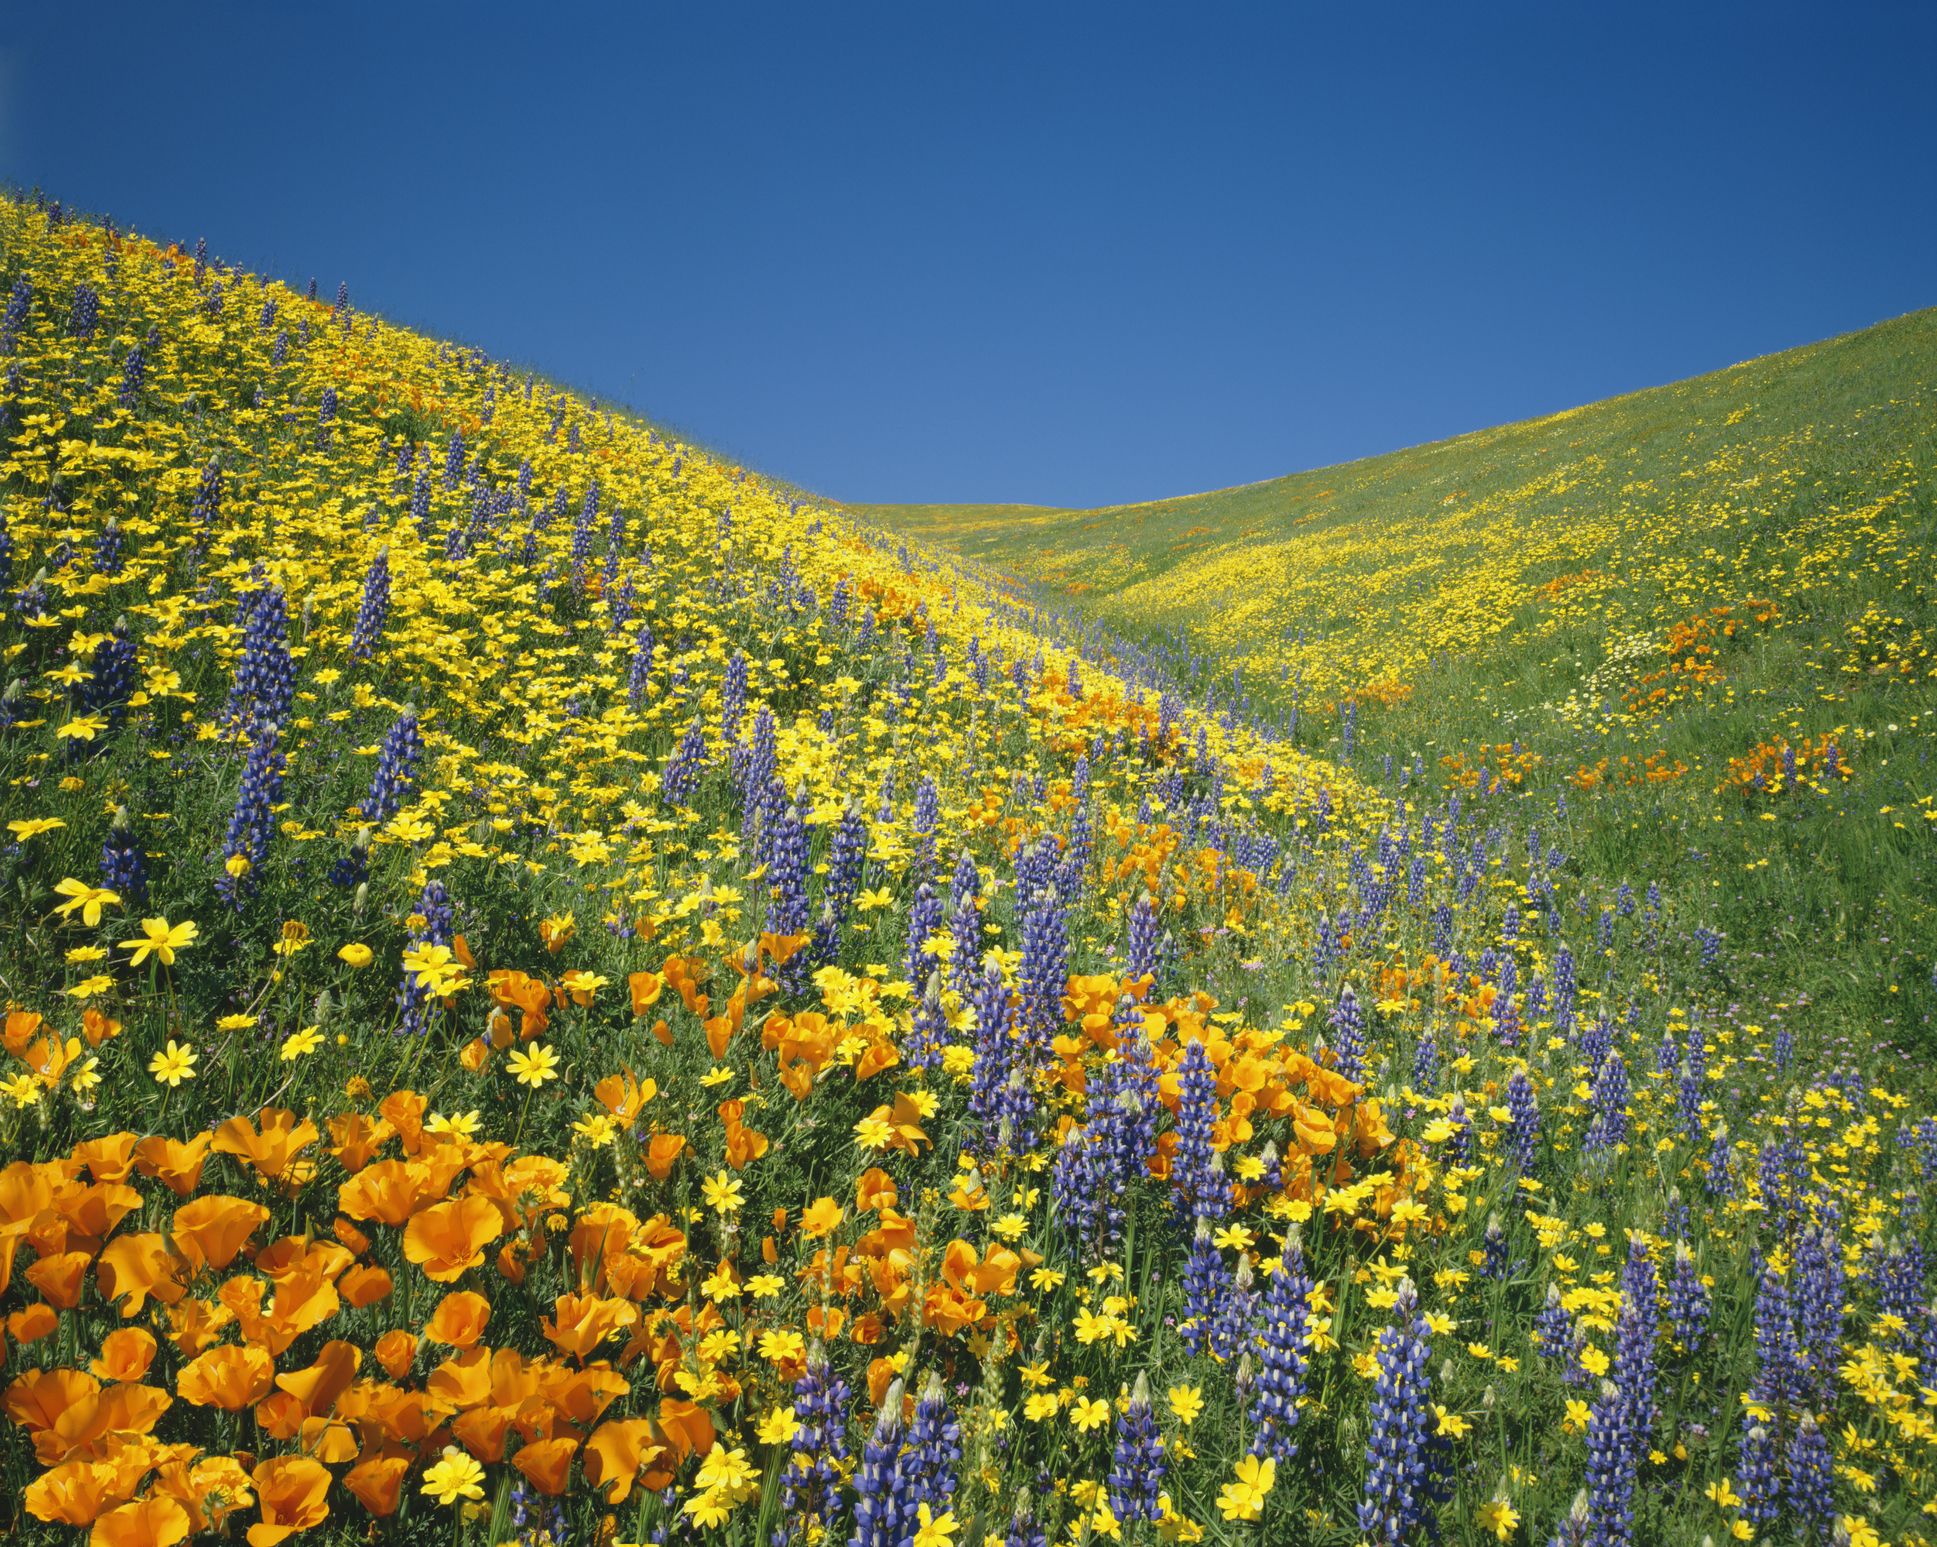 Where to See California Poppies in Full Bloom (2023 Guide)